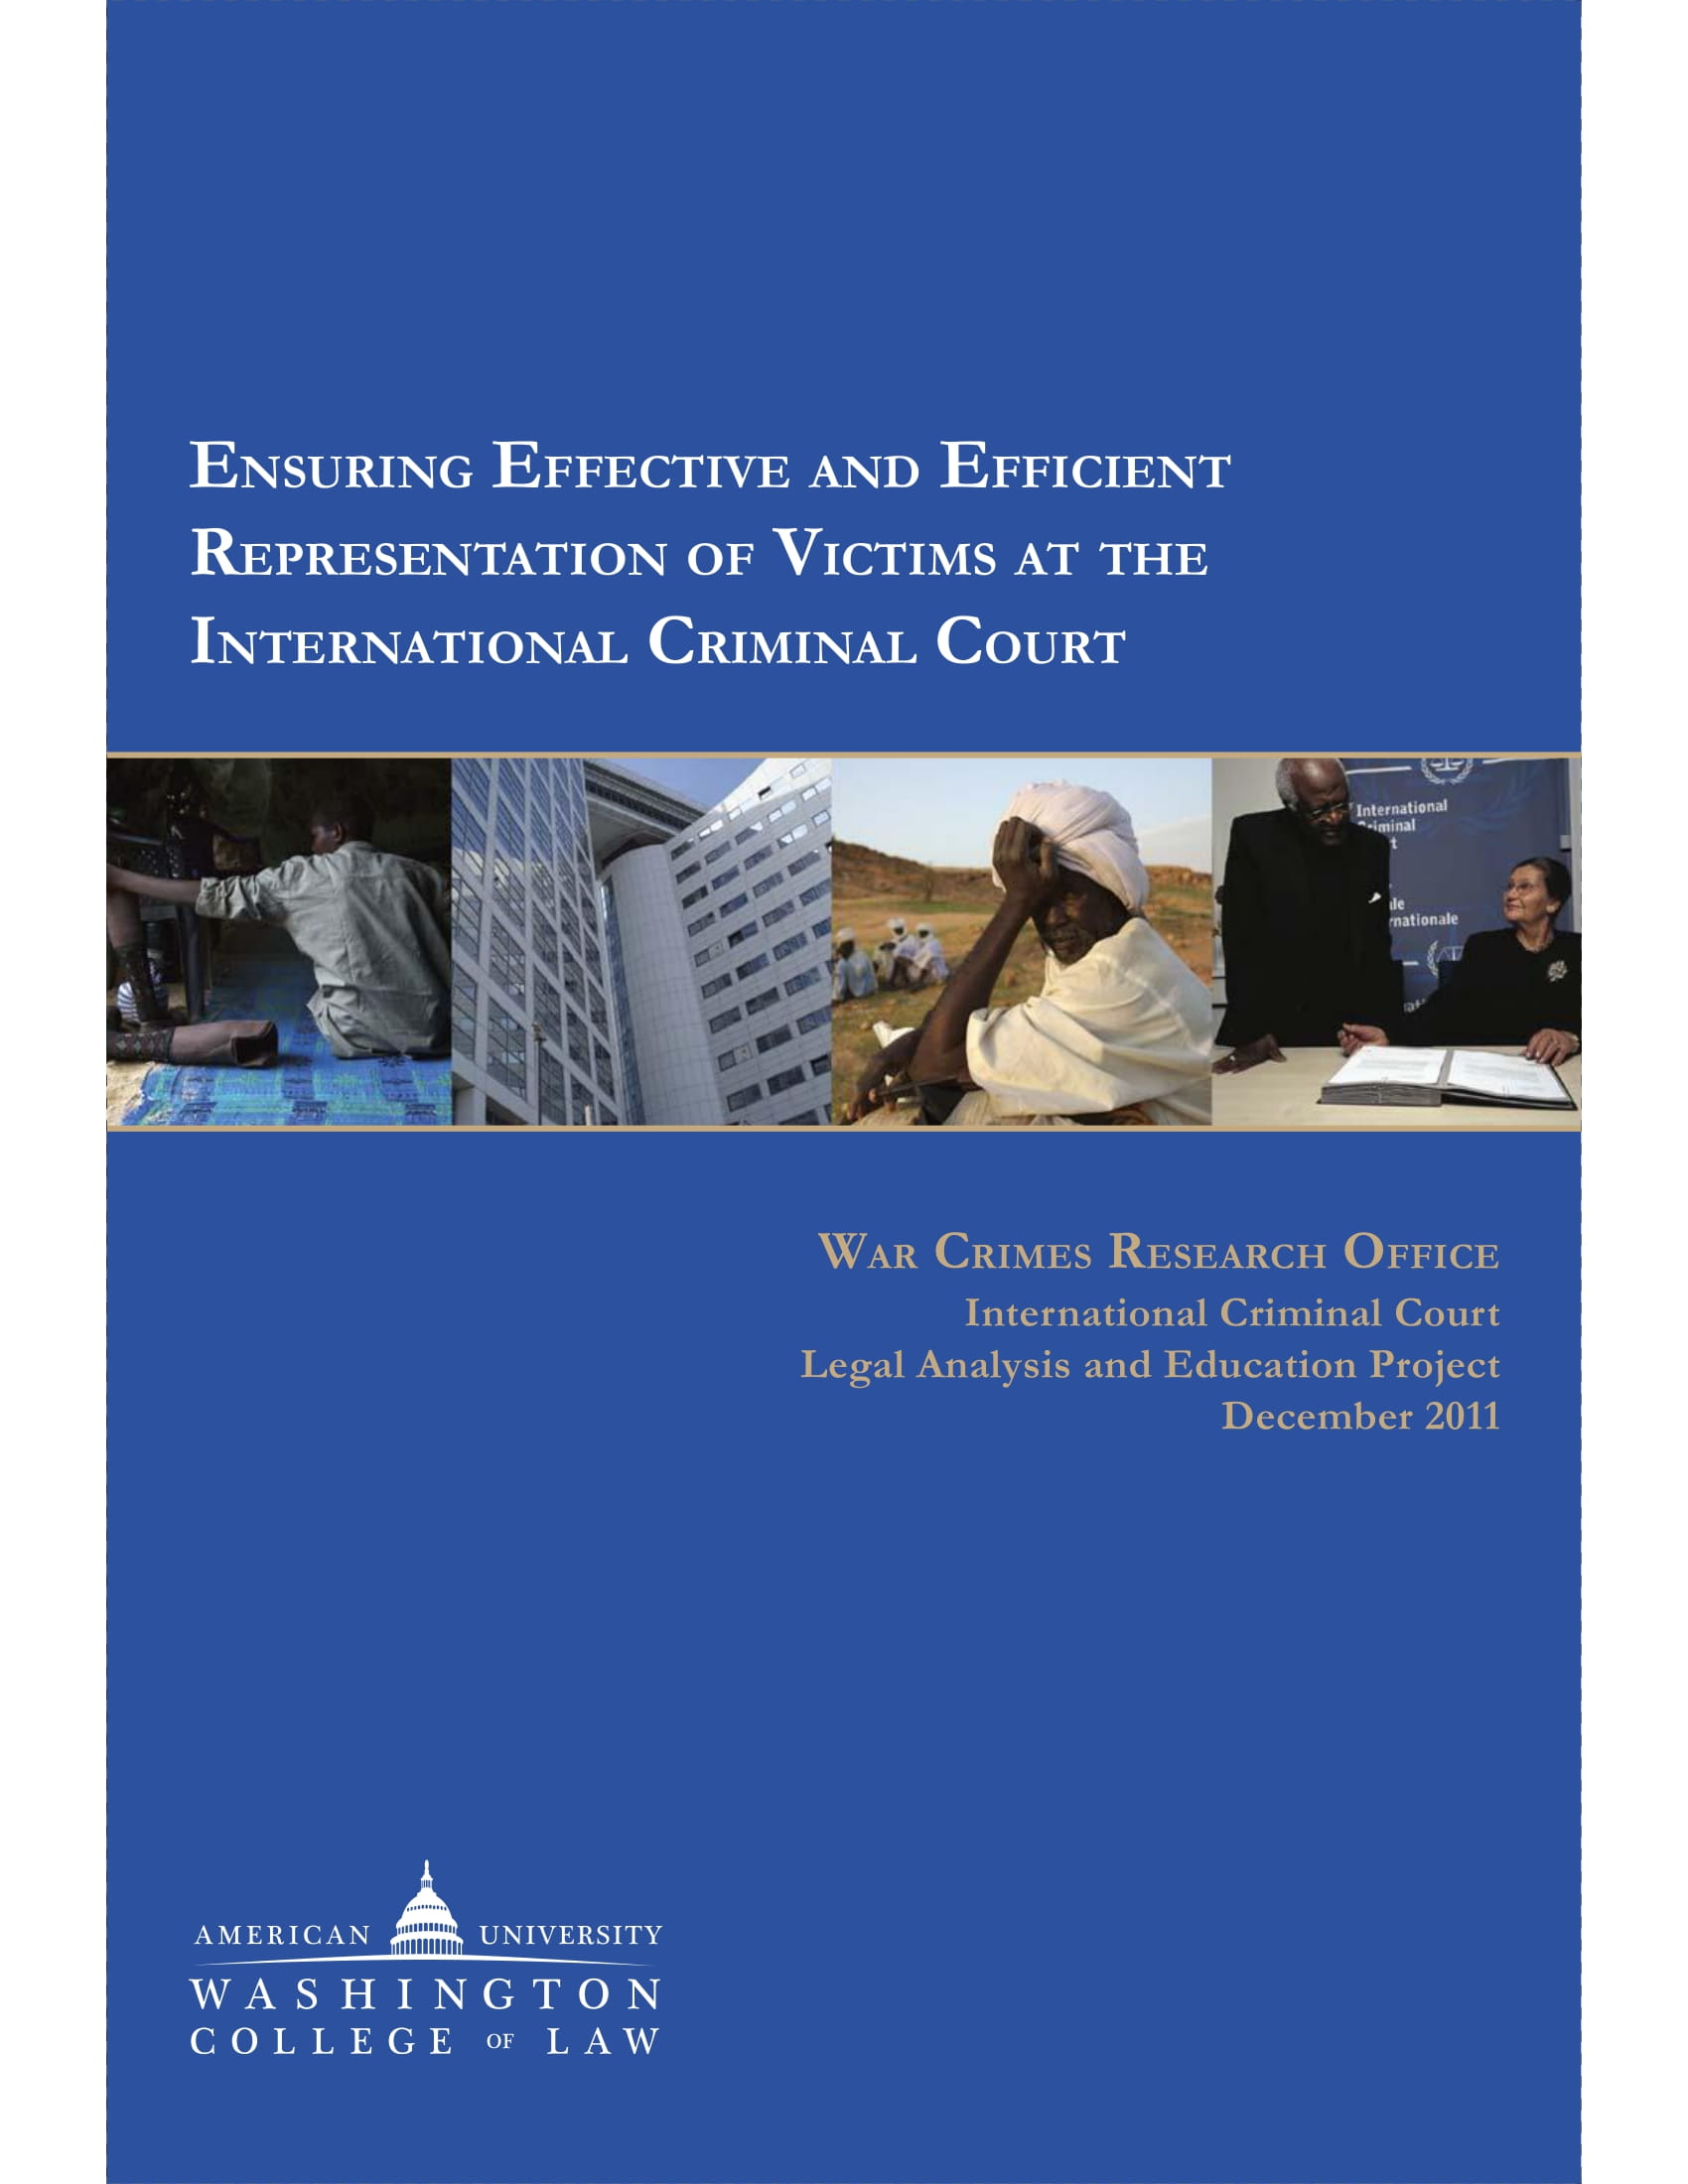 Report 15: Ensuring Effective and Efficient Representation of Victims at the International Criminal Court